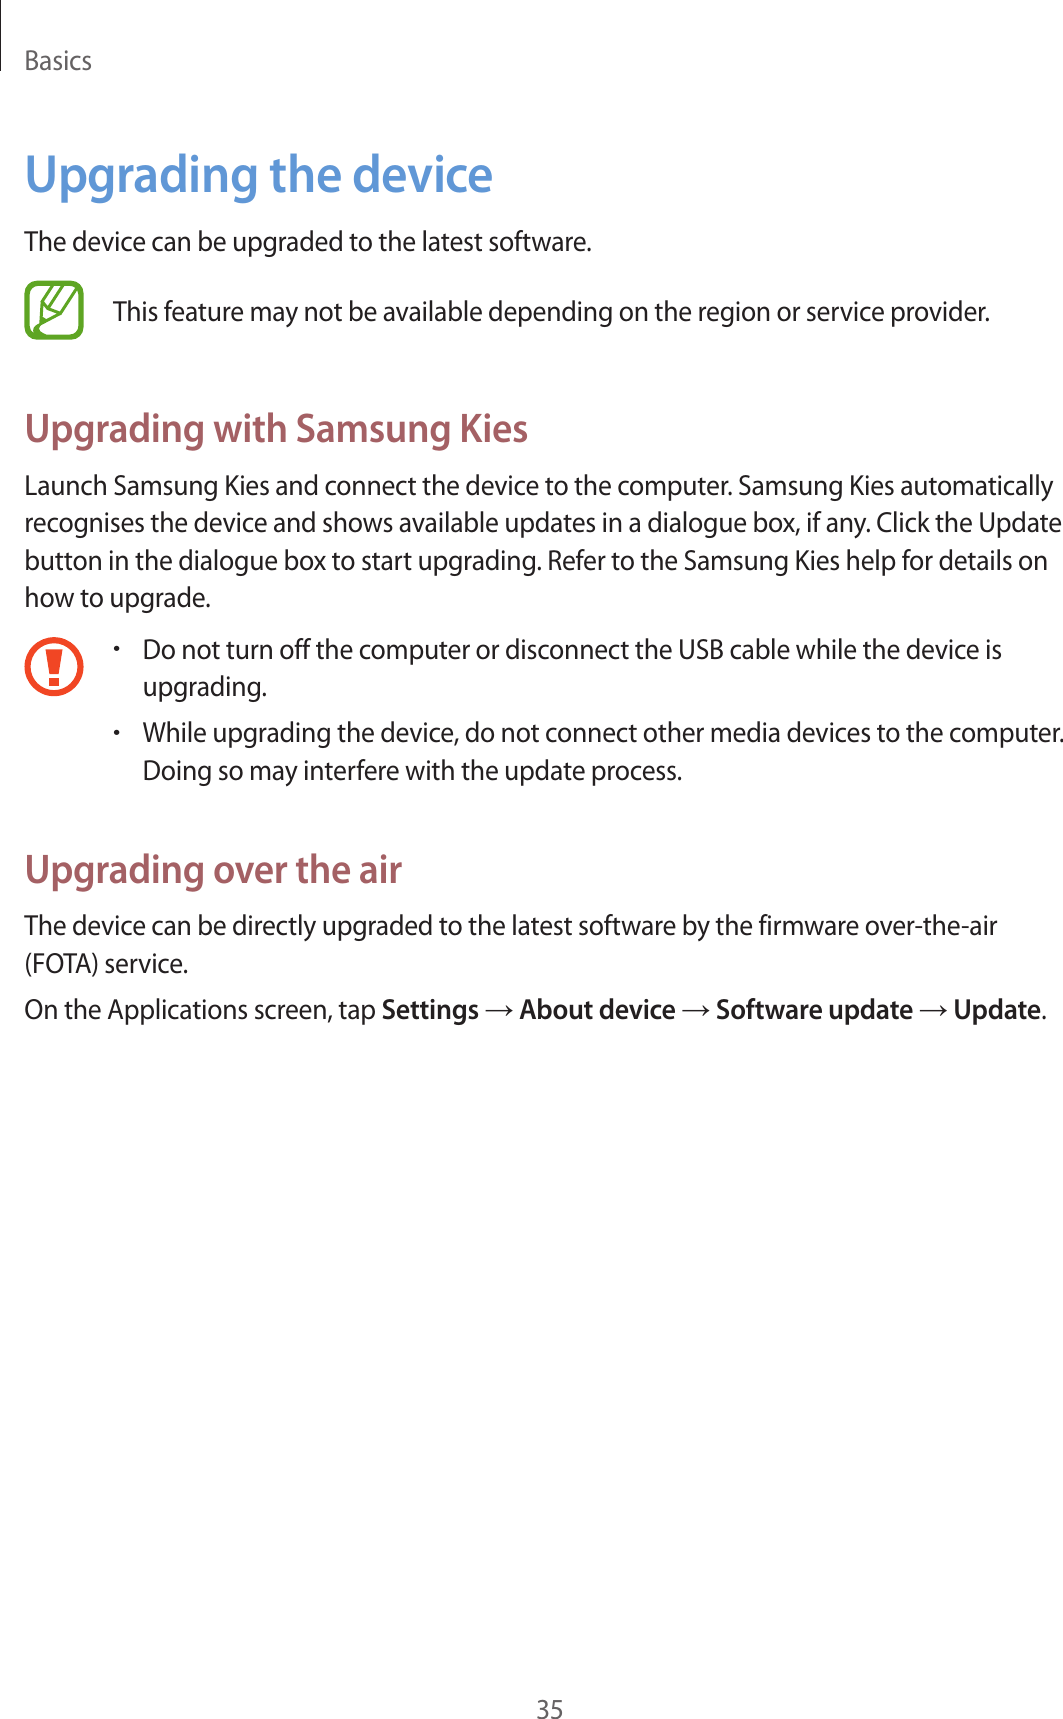 Basics35Upgrading the deviceThe device can be upgraded to the latest software.This feature may not be available depending on the region or service provider.Upgrading with Samsung KiesLaunch Samsung Kies and connect the device to the computer. Samsung Kies automatically recognises the device and shows available updates in a dialogue box, if any. Click the Update button in the dialogue box to start upgrading. Refer to the Samsung Kies help for details on how to upgrade.•Do not turn off the computer or disconnect the USB cable while the device is upgrading.•While upgrading the device, do not connect other media devices to the computer. Doing so may interfere with the update process.Upgrading over the airThe device can be directly upgraded to the latest software by the firmware over-the-air (FOTA) service.On the Applications screen, tap Settings → About device → Software update → Update.